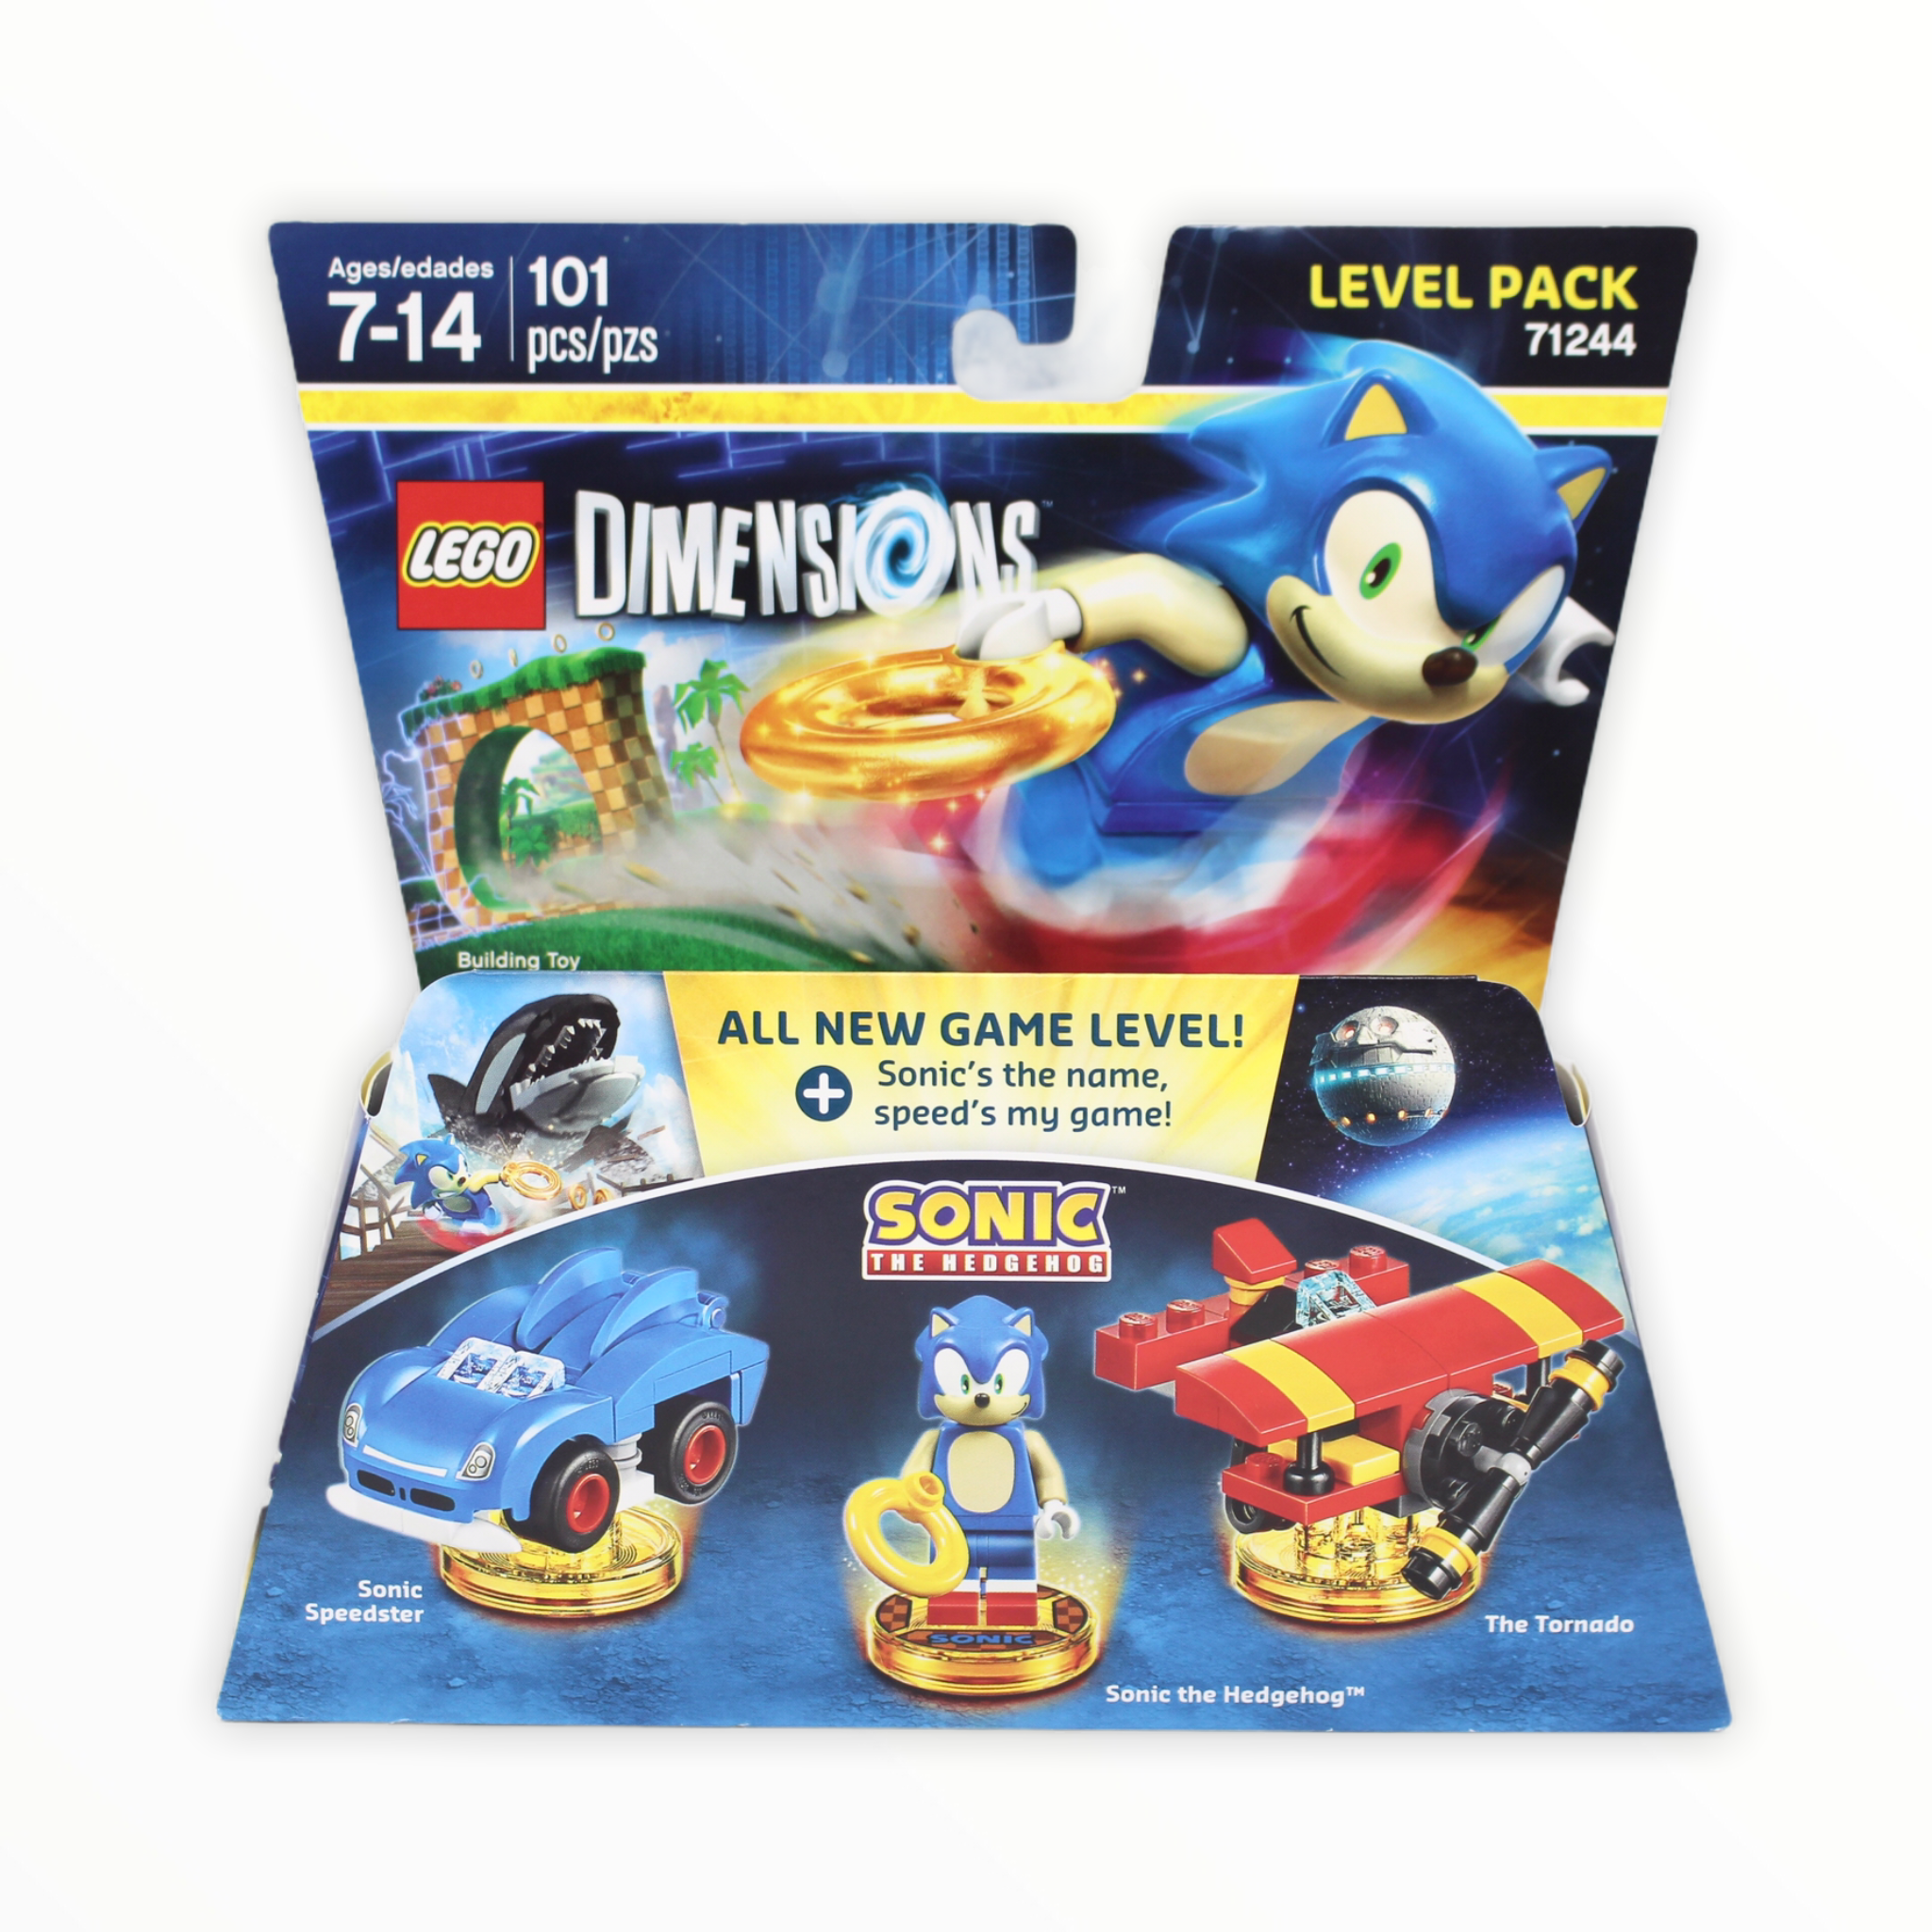 Retired Set 71244 Dimensions Level Pack - Sonic the Hedgehog